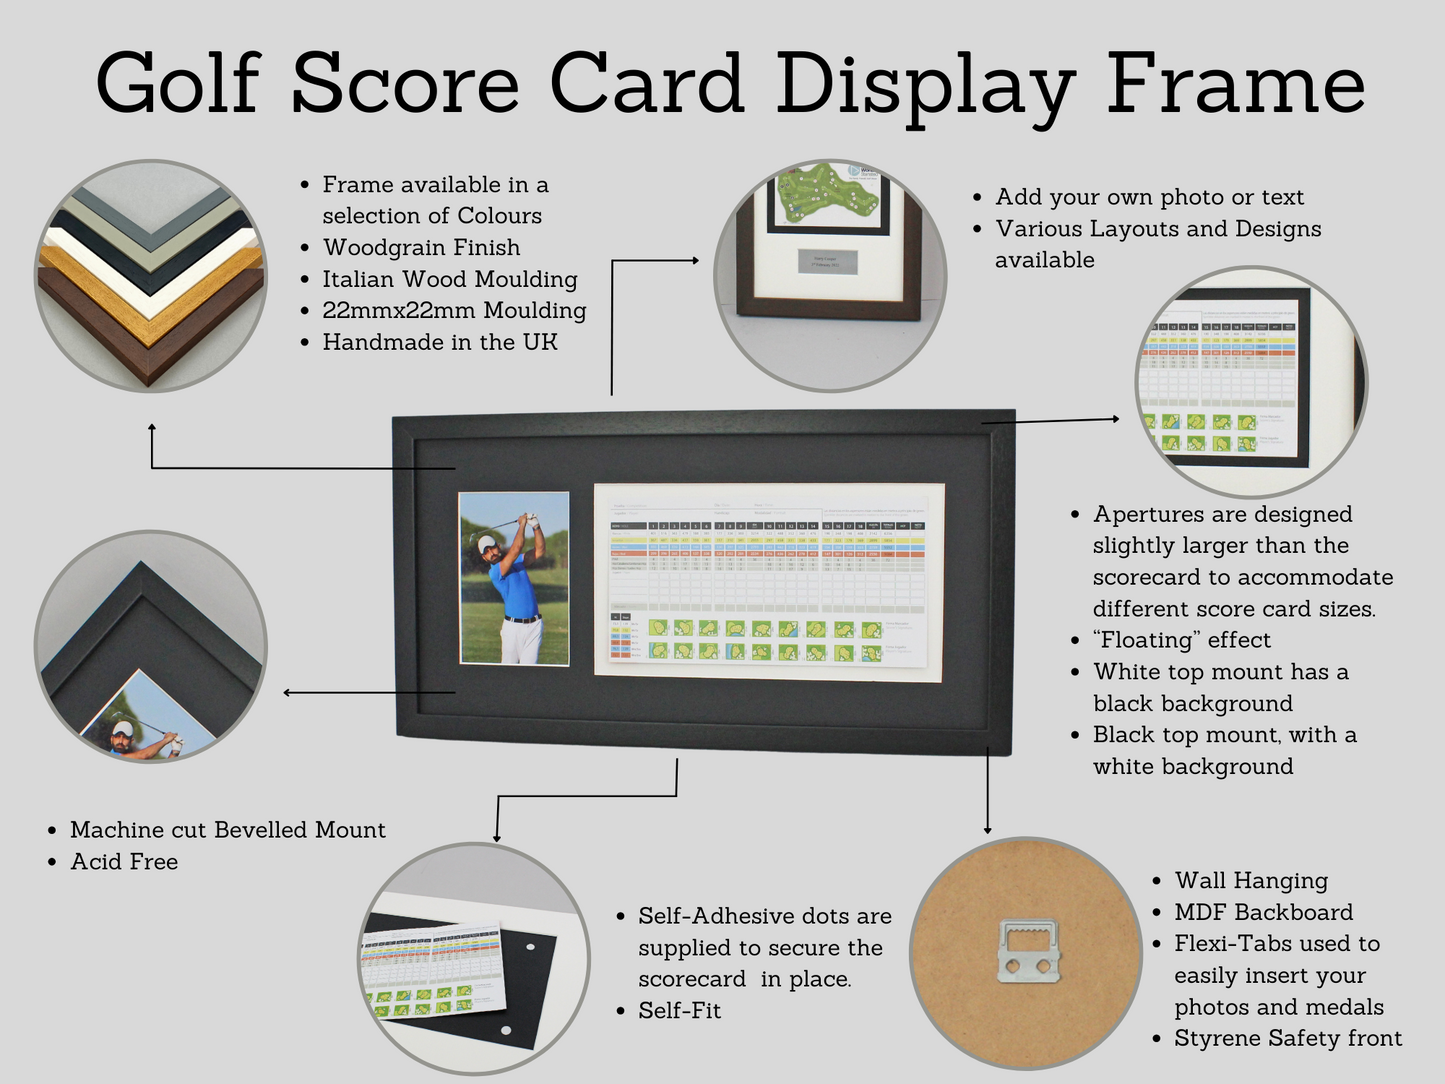 Personalised Golf Score Card Display Frame, With 6x4" Photo. 30x40cm Frame | Score Card sizes can vary - Check your size before purchase.